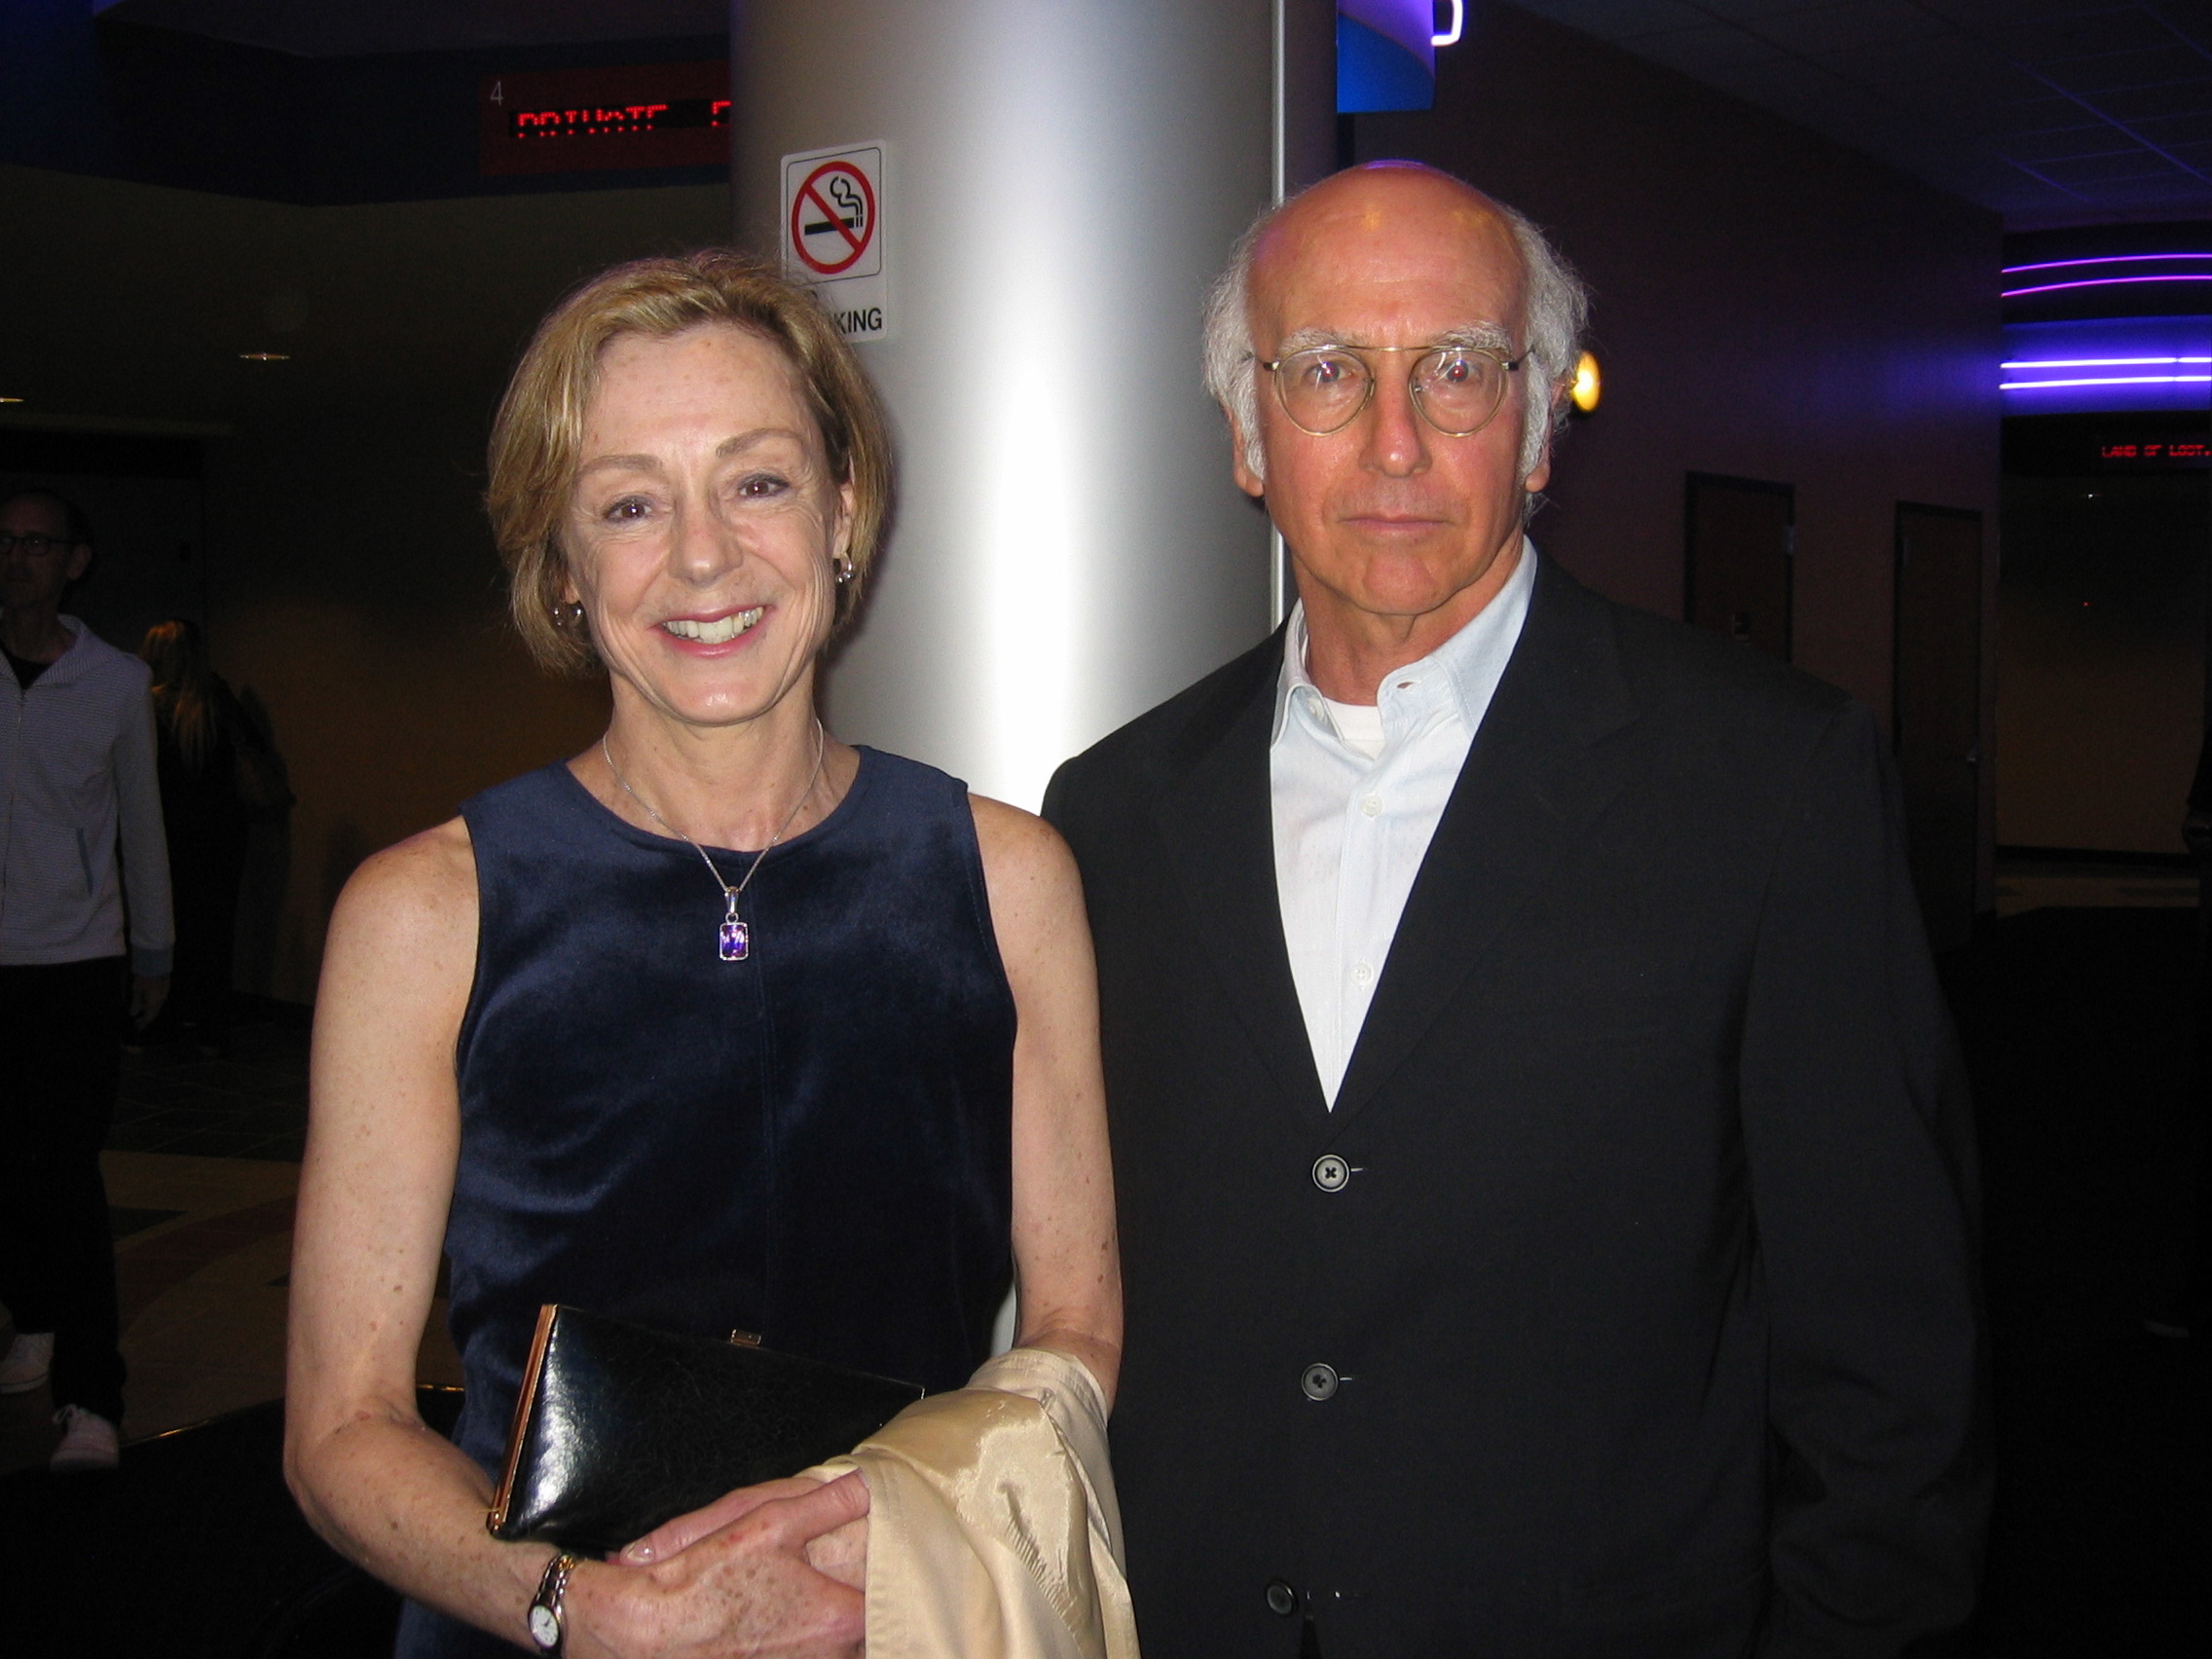 Wanda O'Connell & Larry David at Woody Allen's 'Whatever Works' Premiere NYC 6.10.09